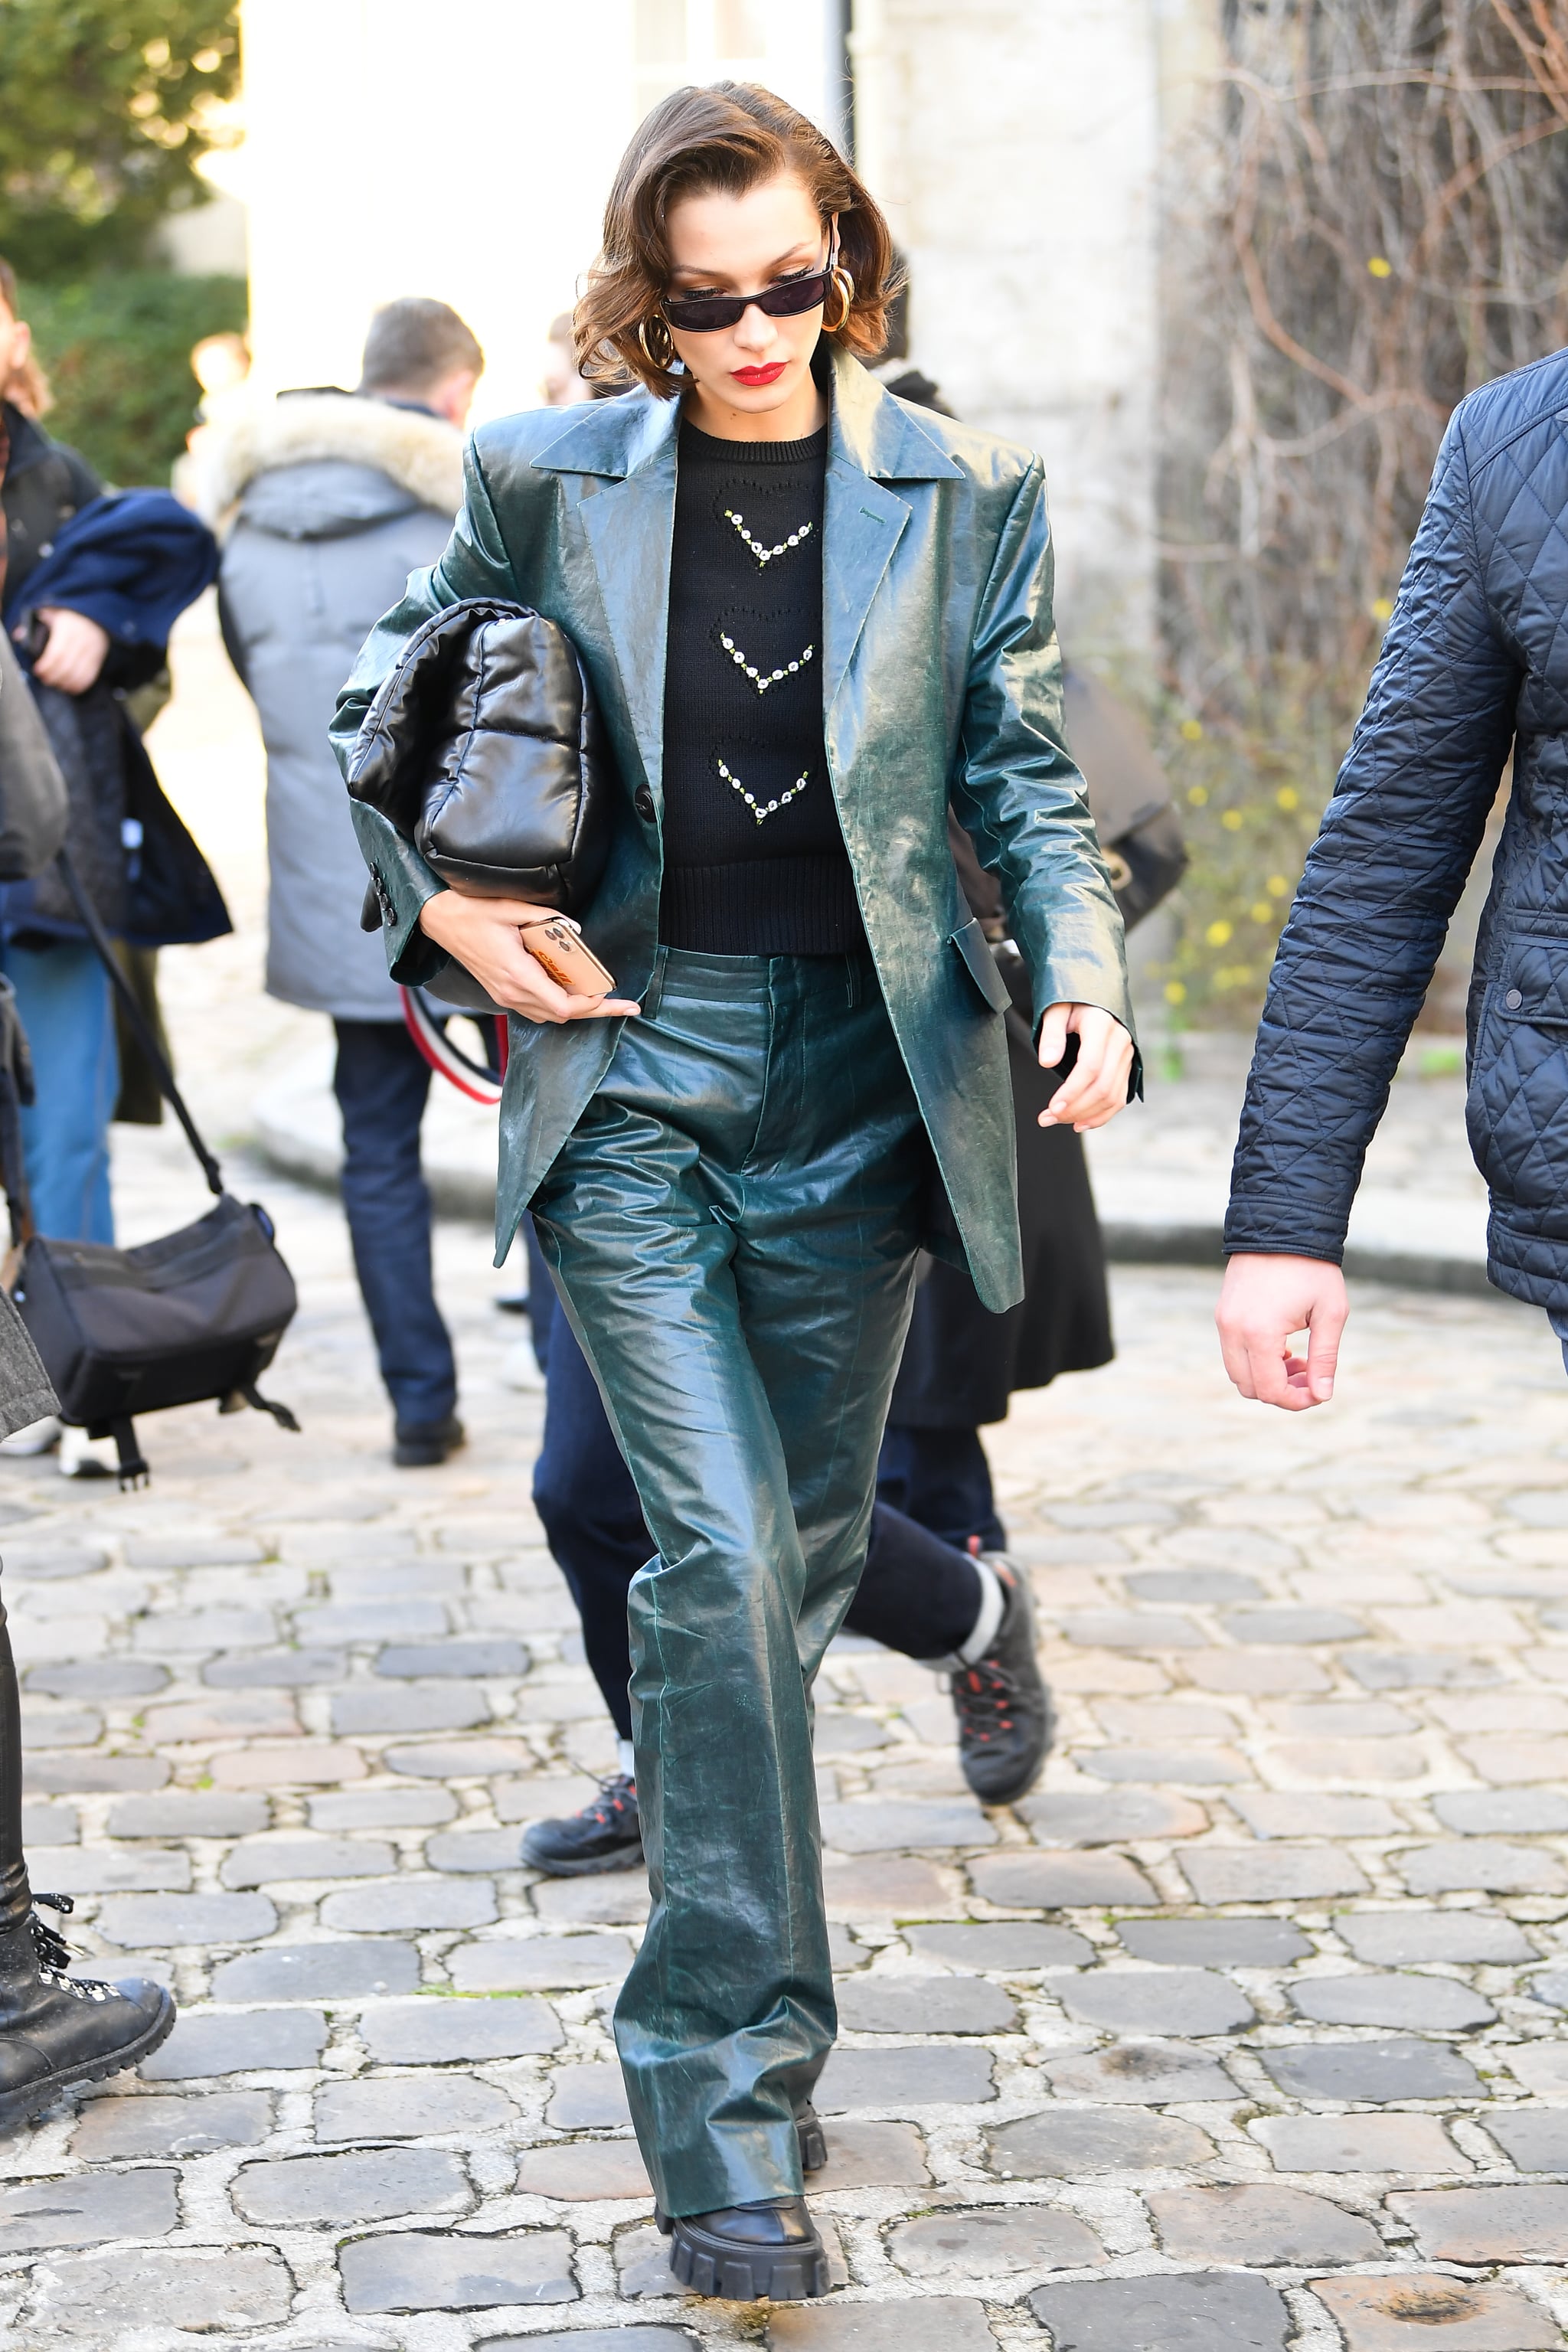 Bella Hadid's Paris Fashion Week Style Is Even Better Off The